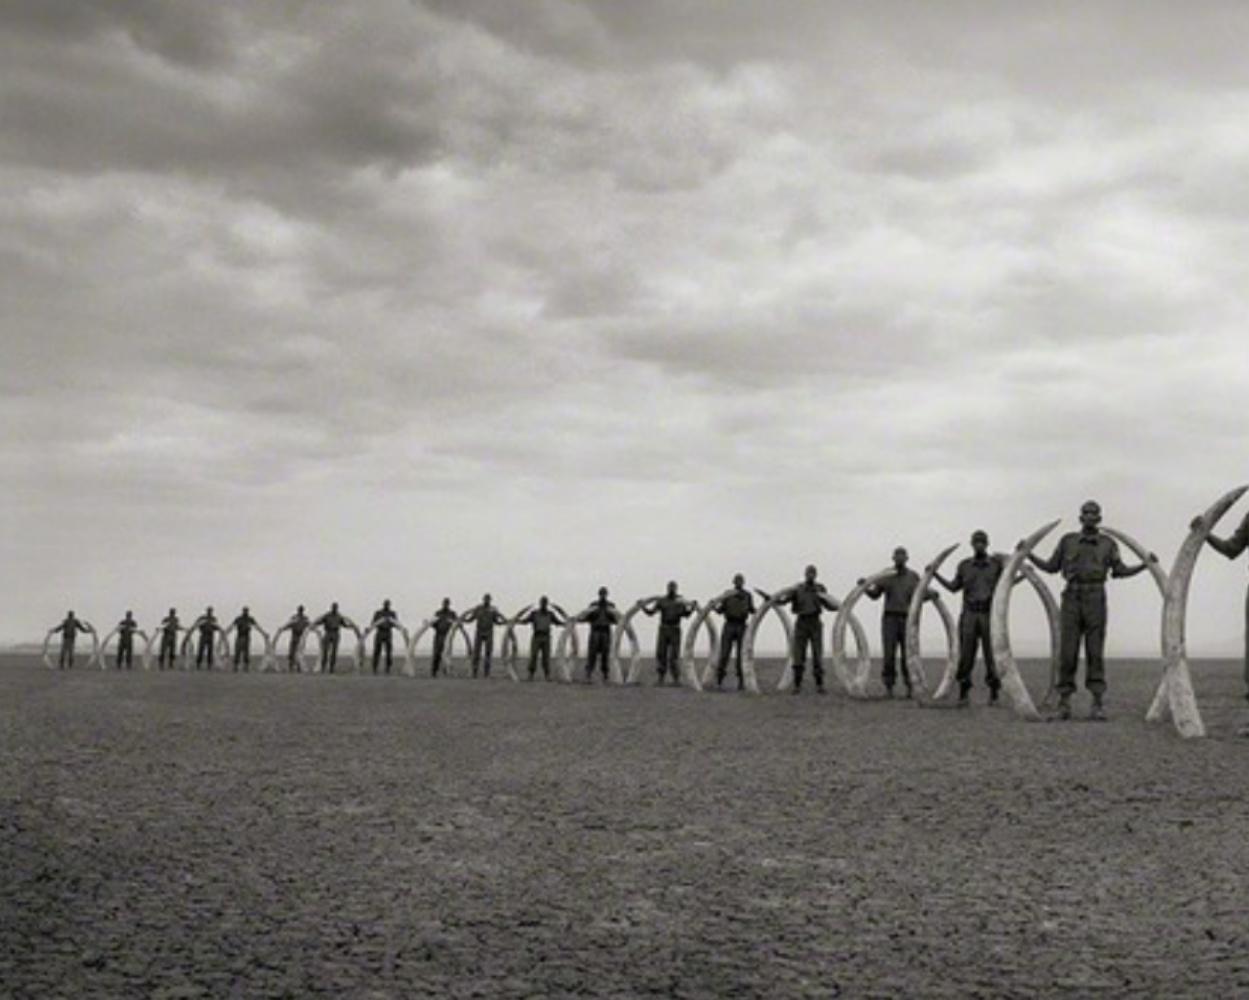 Rangers (Line Of) With Tusks Of Killed Elephants, Amboseli – Nick Brandt, Africa For Sale 1